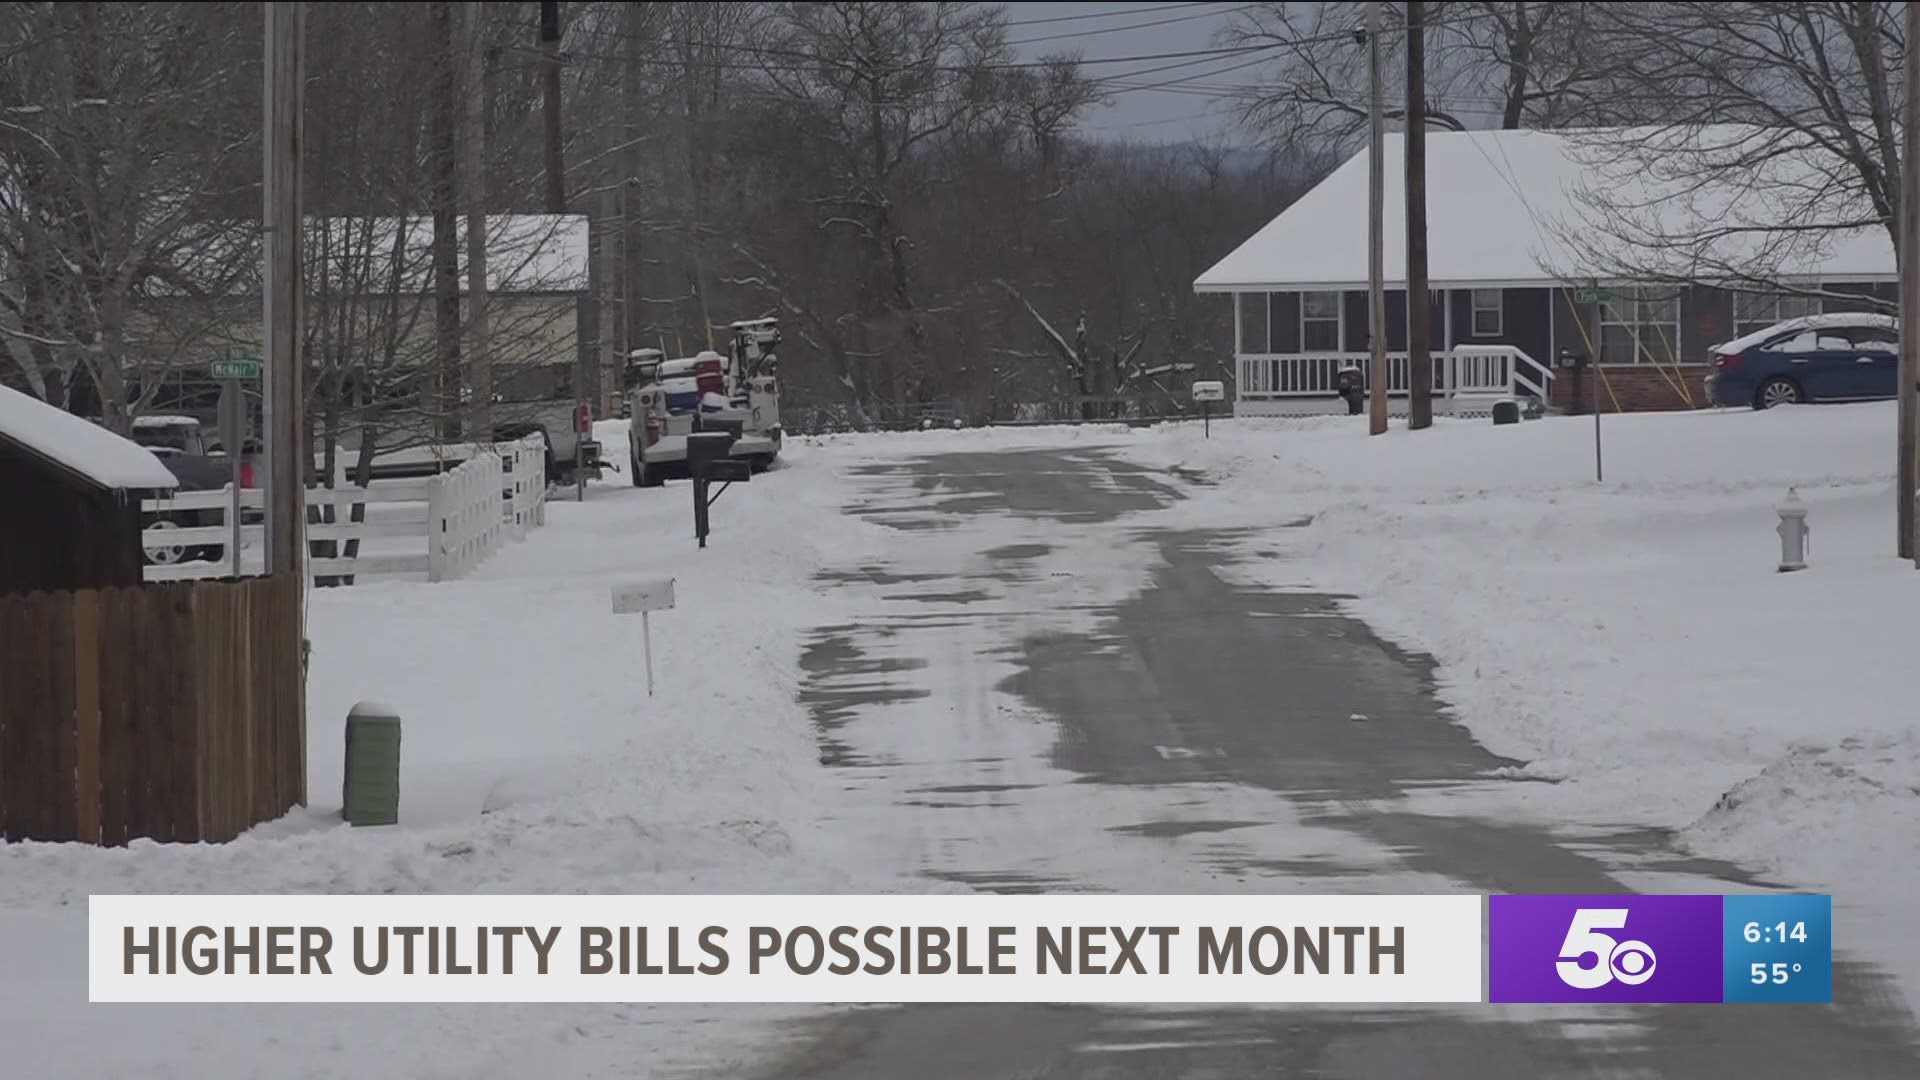 Higher utility bills possible next month after winter storm